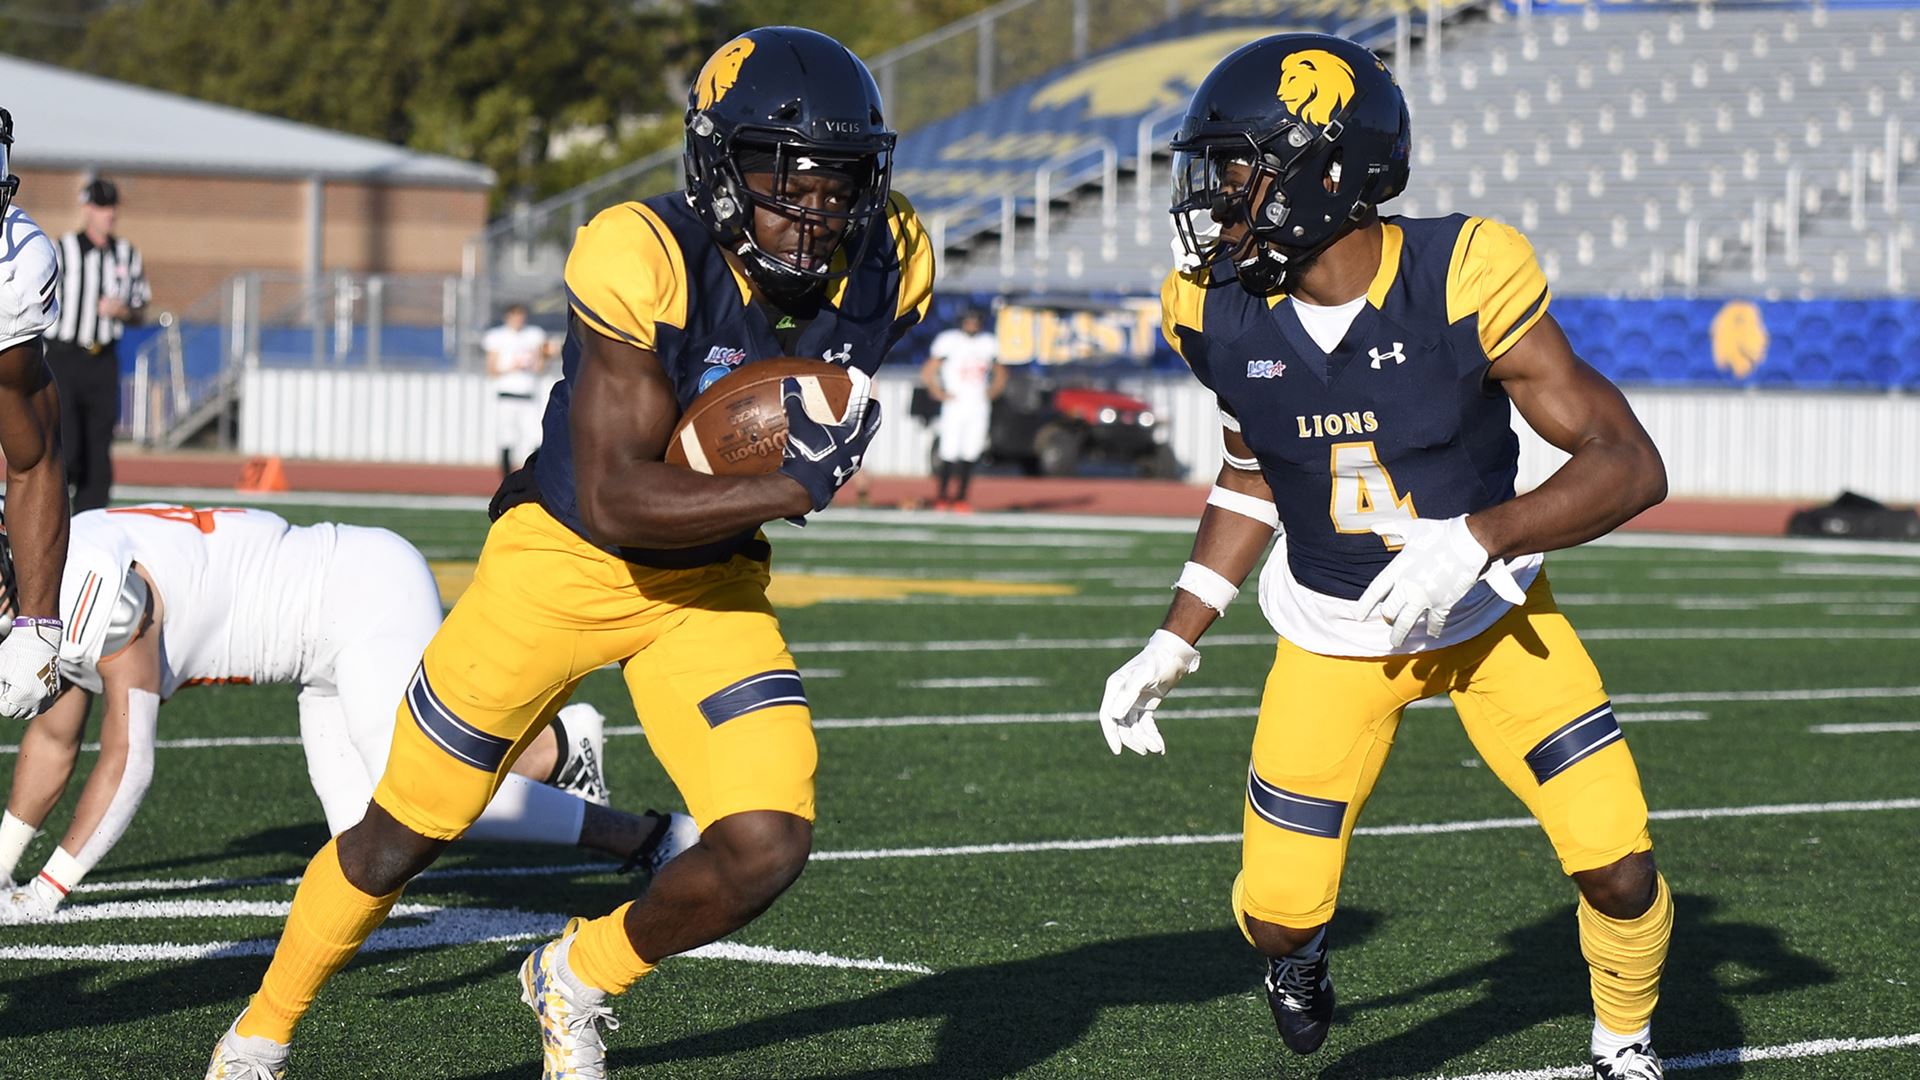 TEXAS A&M-COMMERCE FOOTBALL: No. 24 Lions close out home schedule with 44-13 win over UT Permian Basin